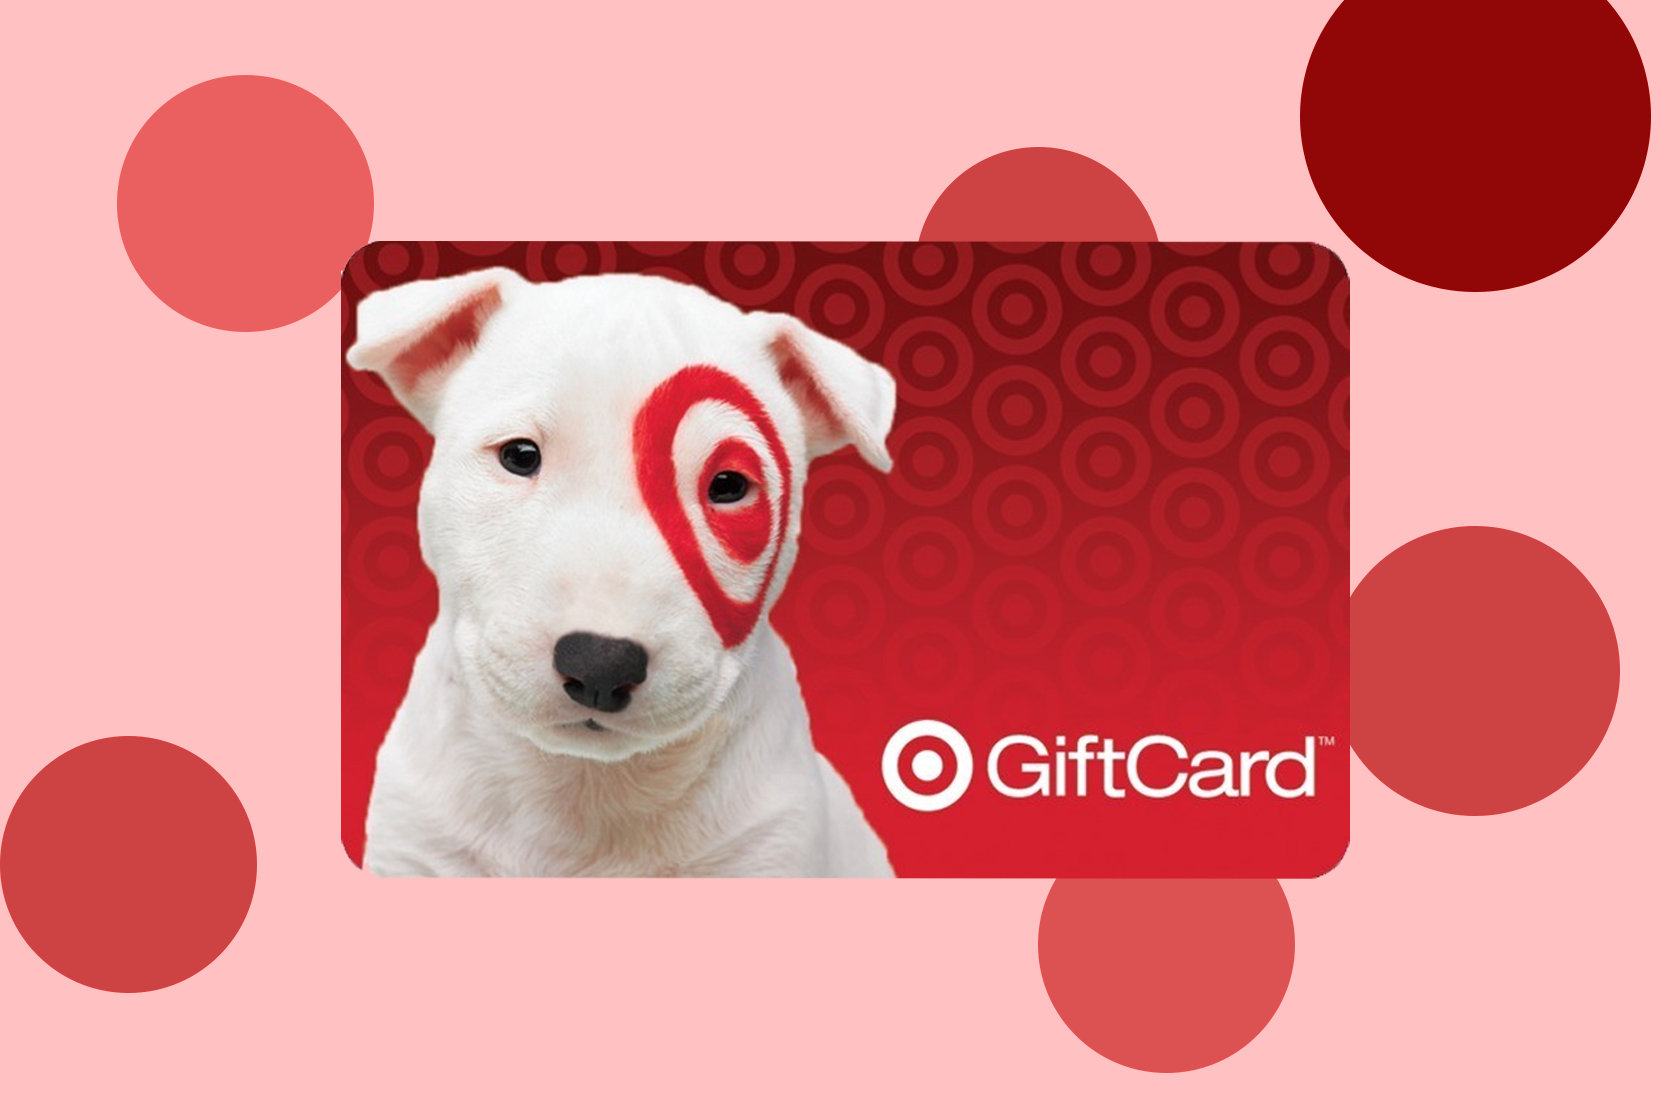 target-gift-cards-are-10-off-ahead-of-their-largest-sales-event-of-the